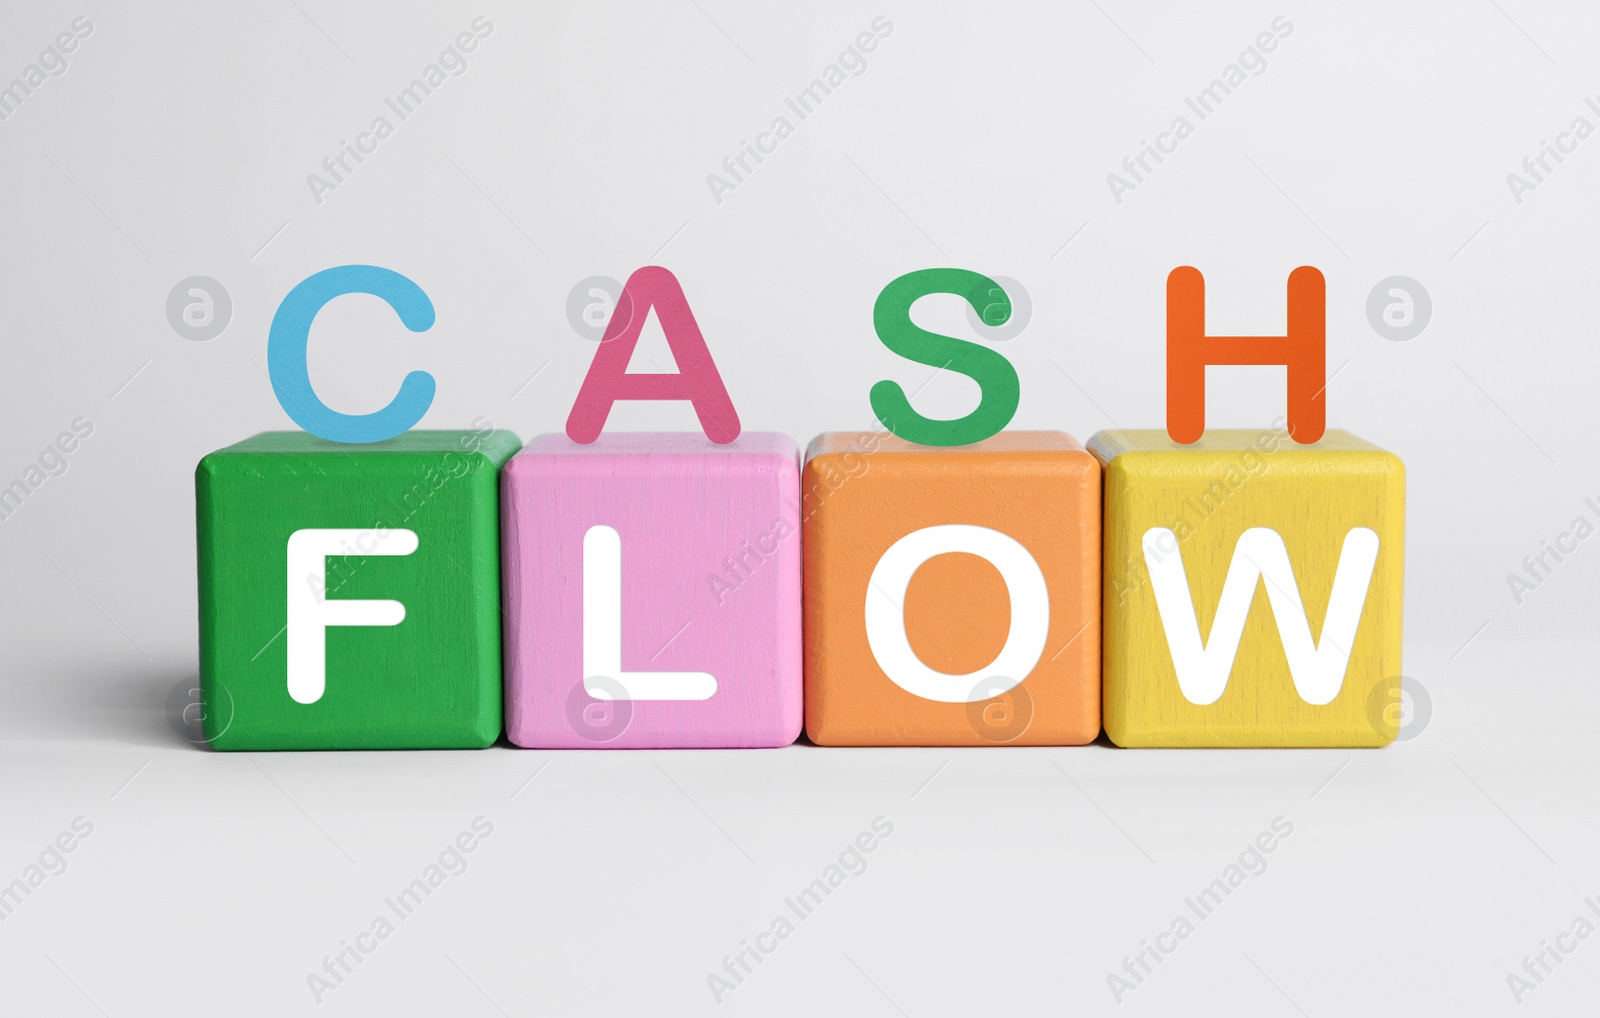 Image of Phrase Cash Flow made with letters and colorful cubes on white background